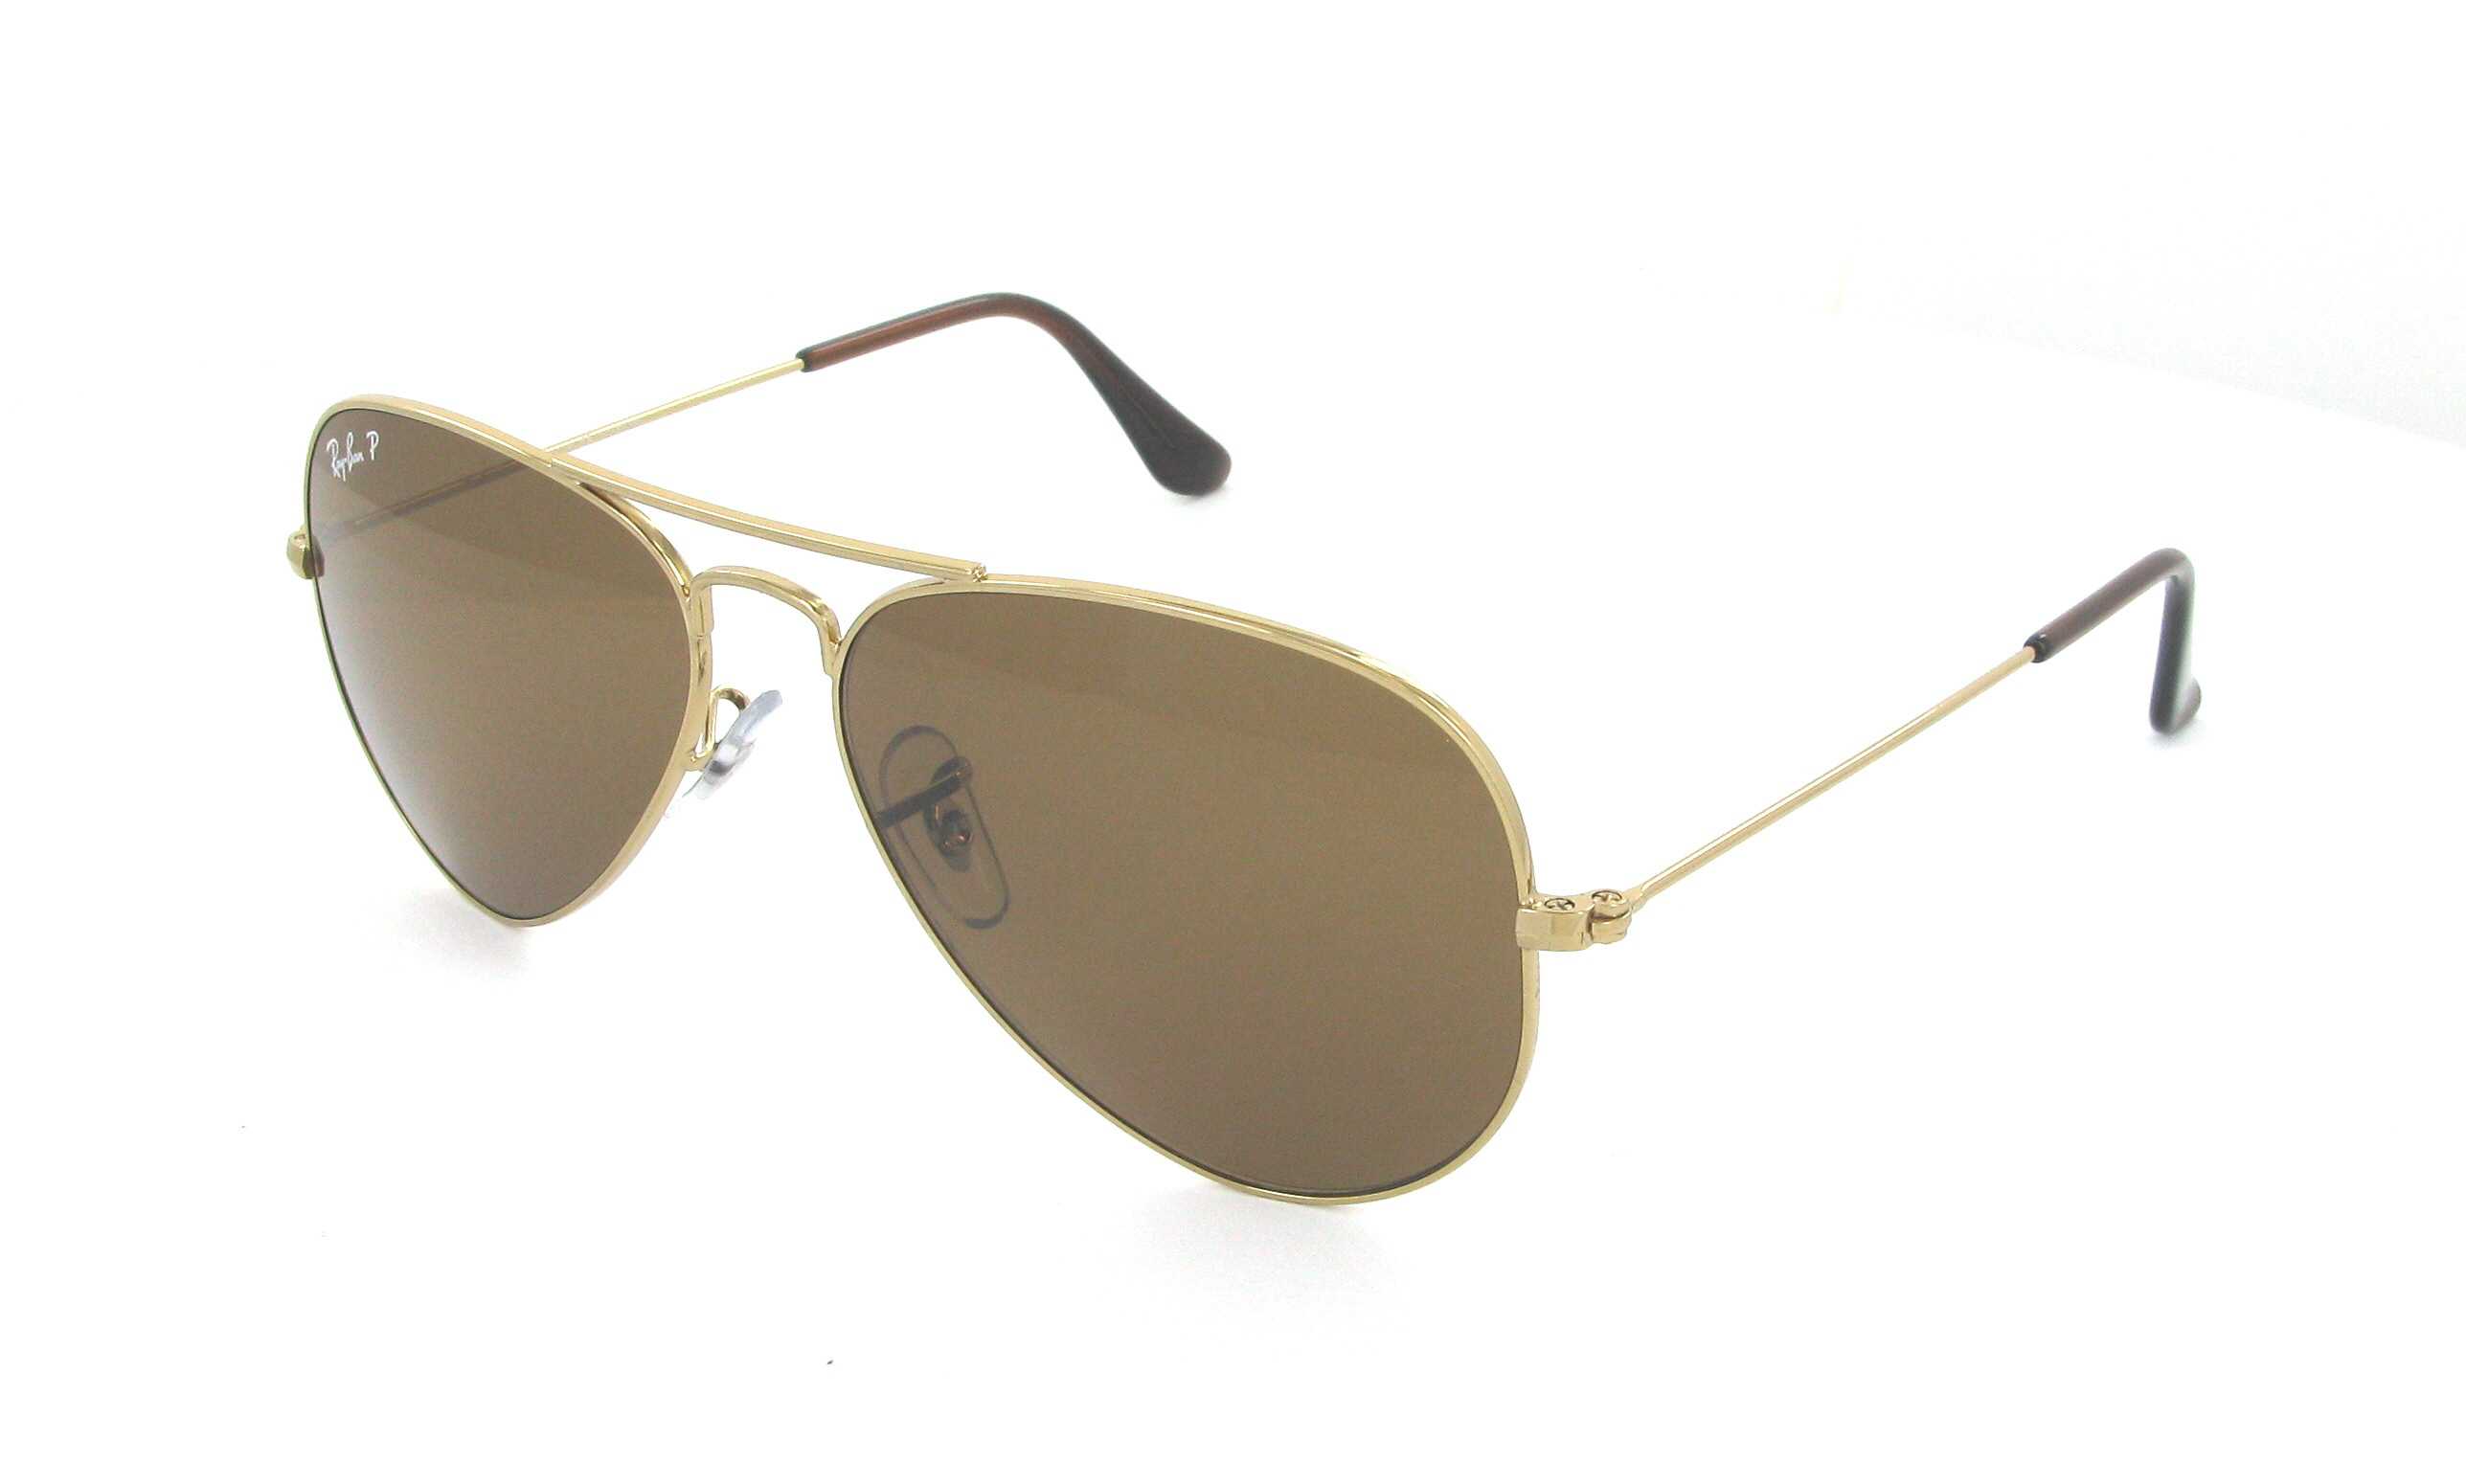 ray ban aviator femme petite taille